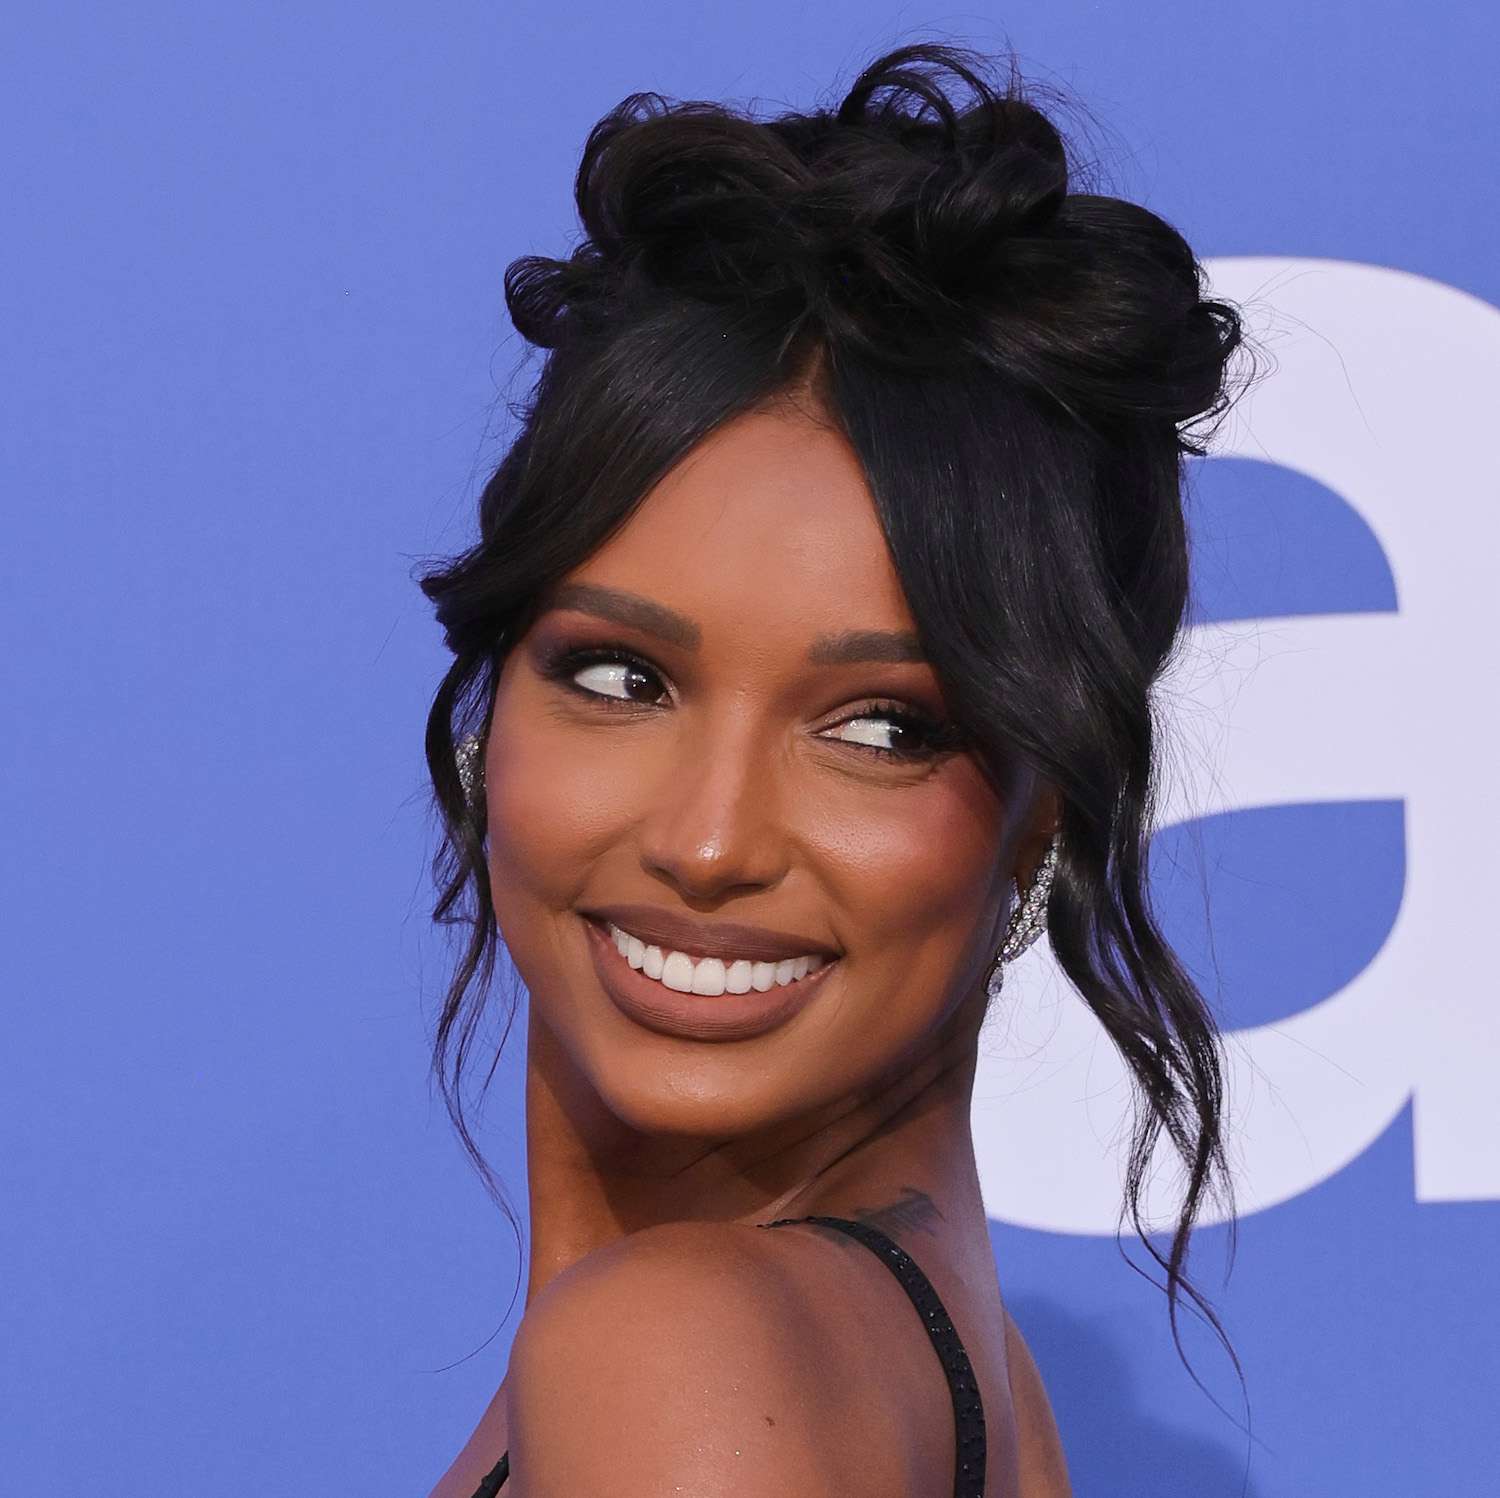 Jasmine Tookes wears an updo hairstyle with curled curtain bangs